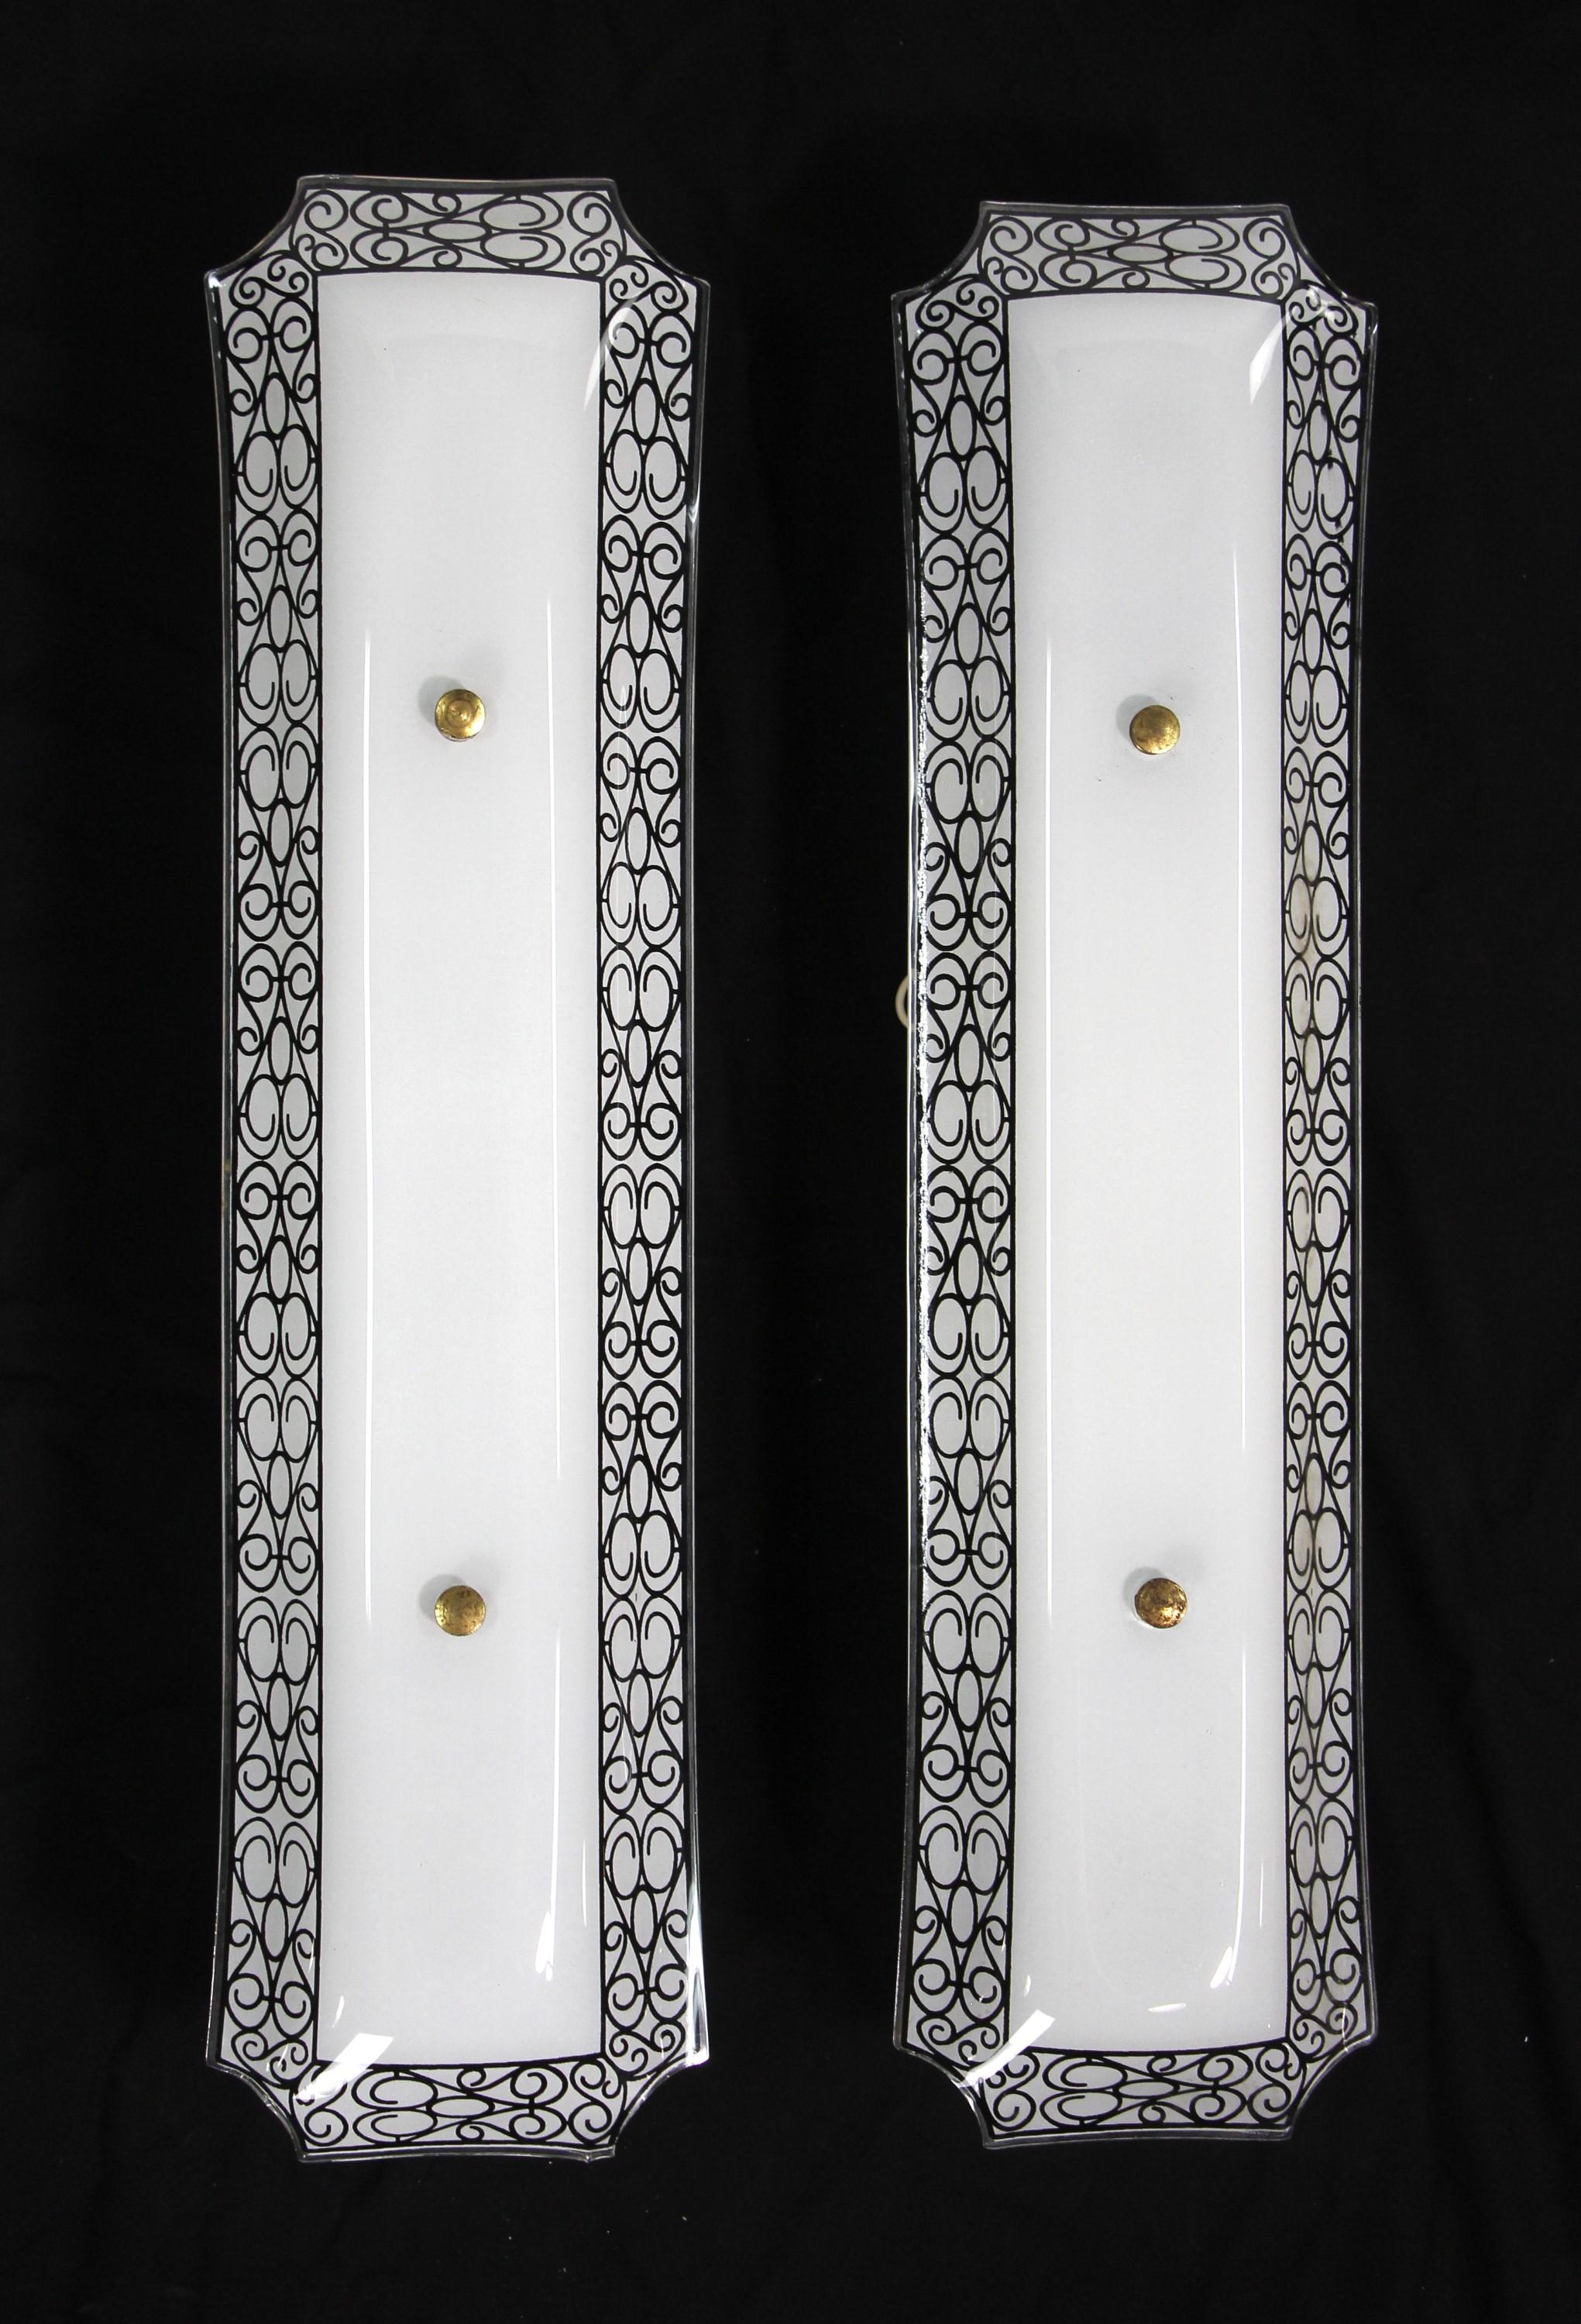 1950s French style bathroom wall sconces with long white glass surrounded by ornate black swirls.  They are mounted on a white enameled mounting plate.  Each of the sconces takes two bulbs.  Made in the U.S.  The price includes restoration. Priced